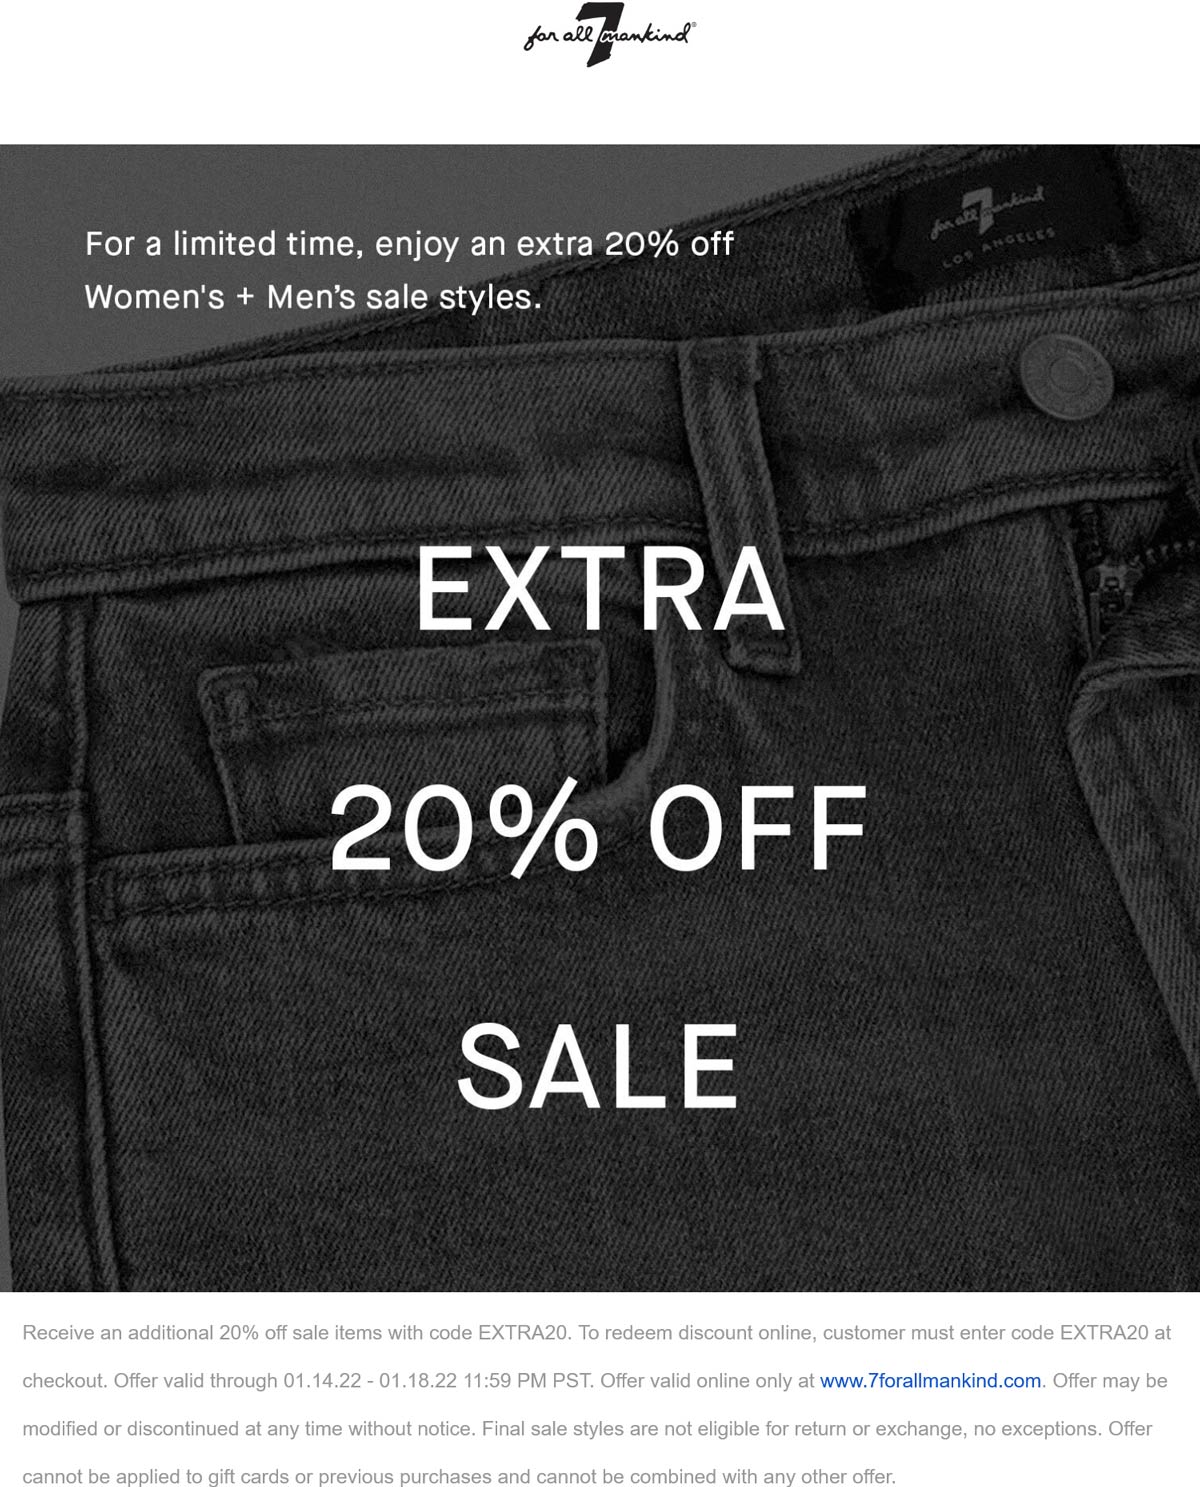 7 for all Mankind stores Coupon  Extra 20% off sale items online at 7 for all Mankind via promo code EXTRA20 #7forallmankind 